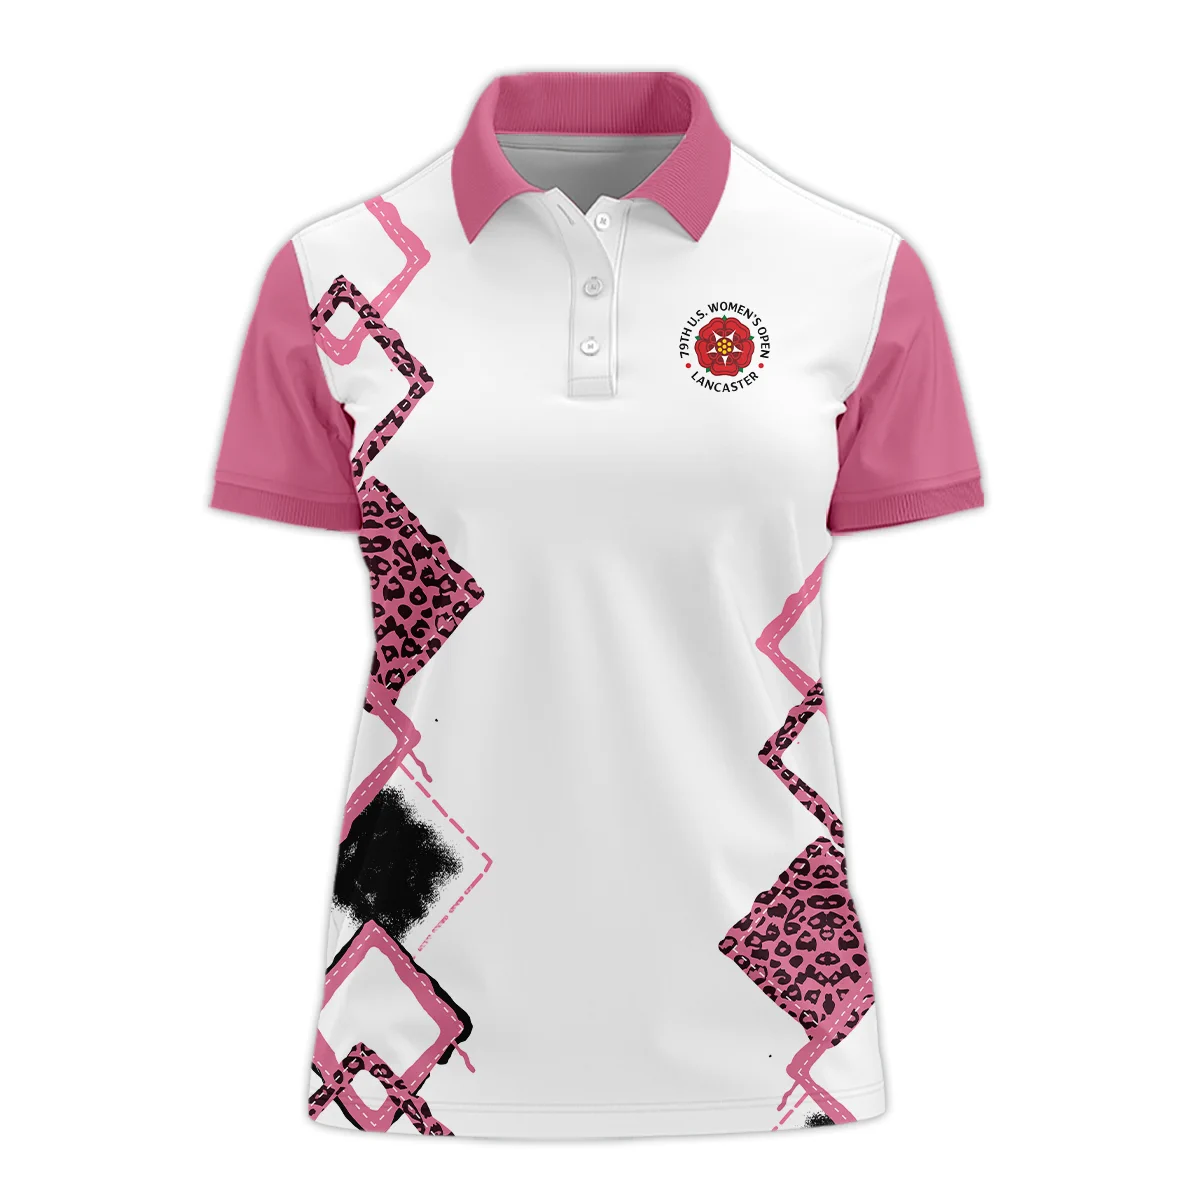 Leopard Golf Color Pink 79th U.S. Women’s Open Lancaster Sleeveless Polo Shirt Pink Color All Over Print Sleeveless Polo Shirt For Woman